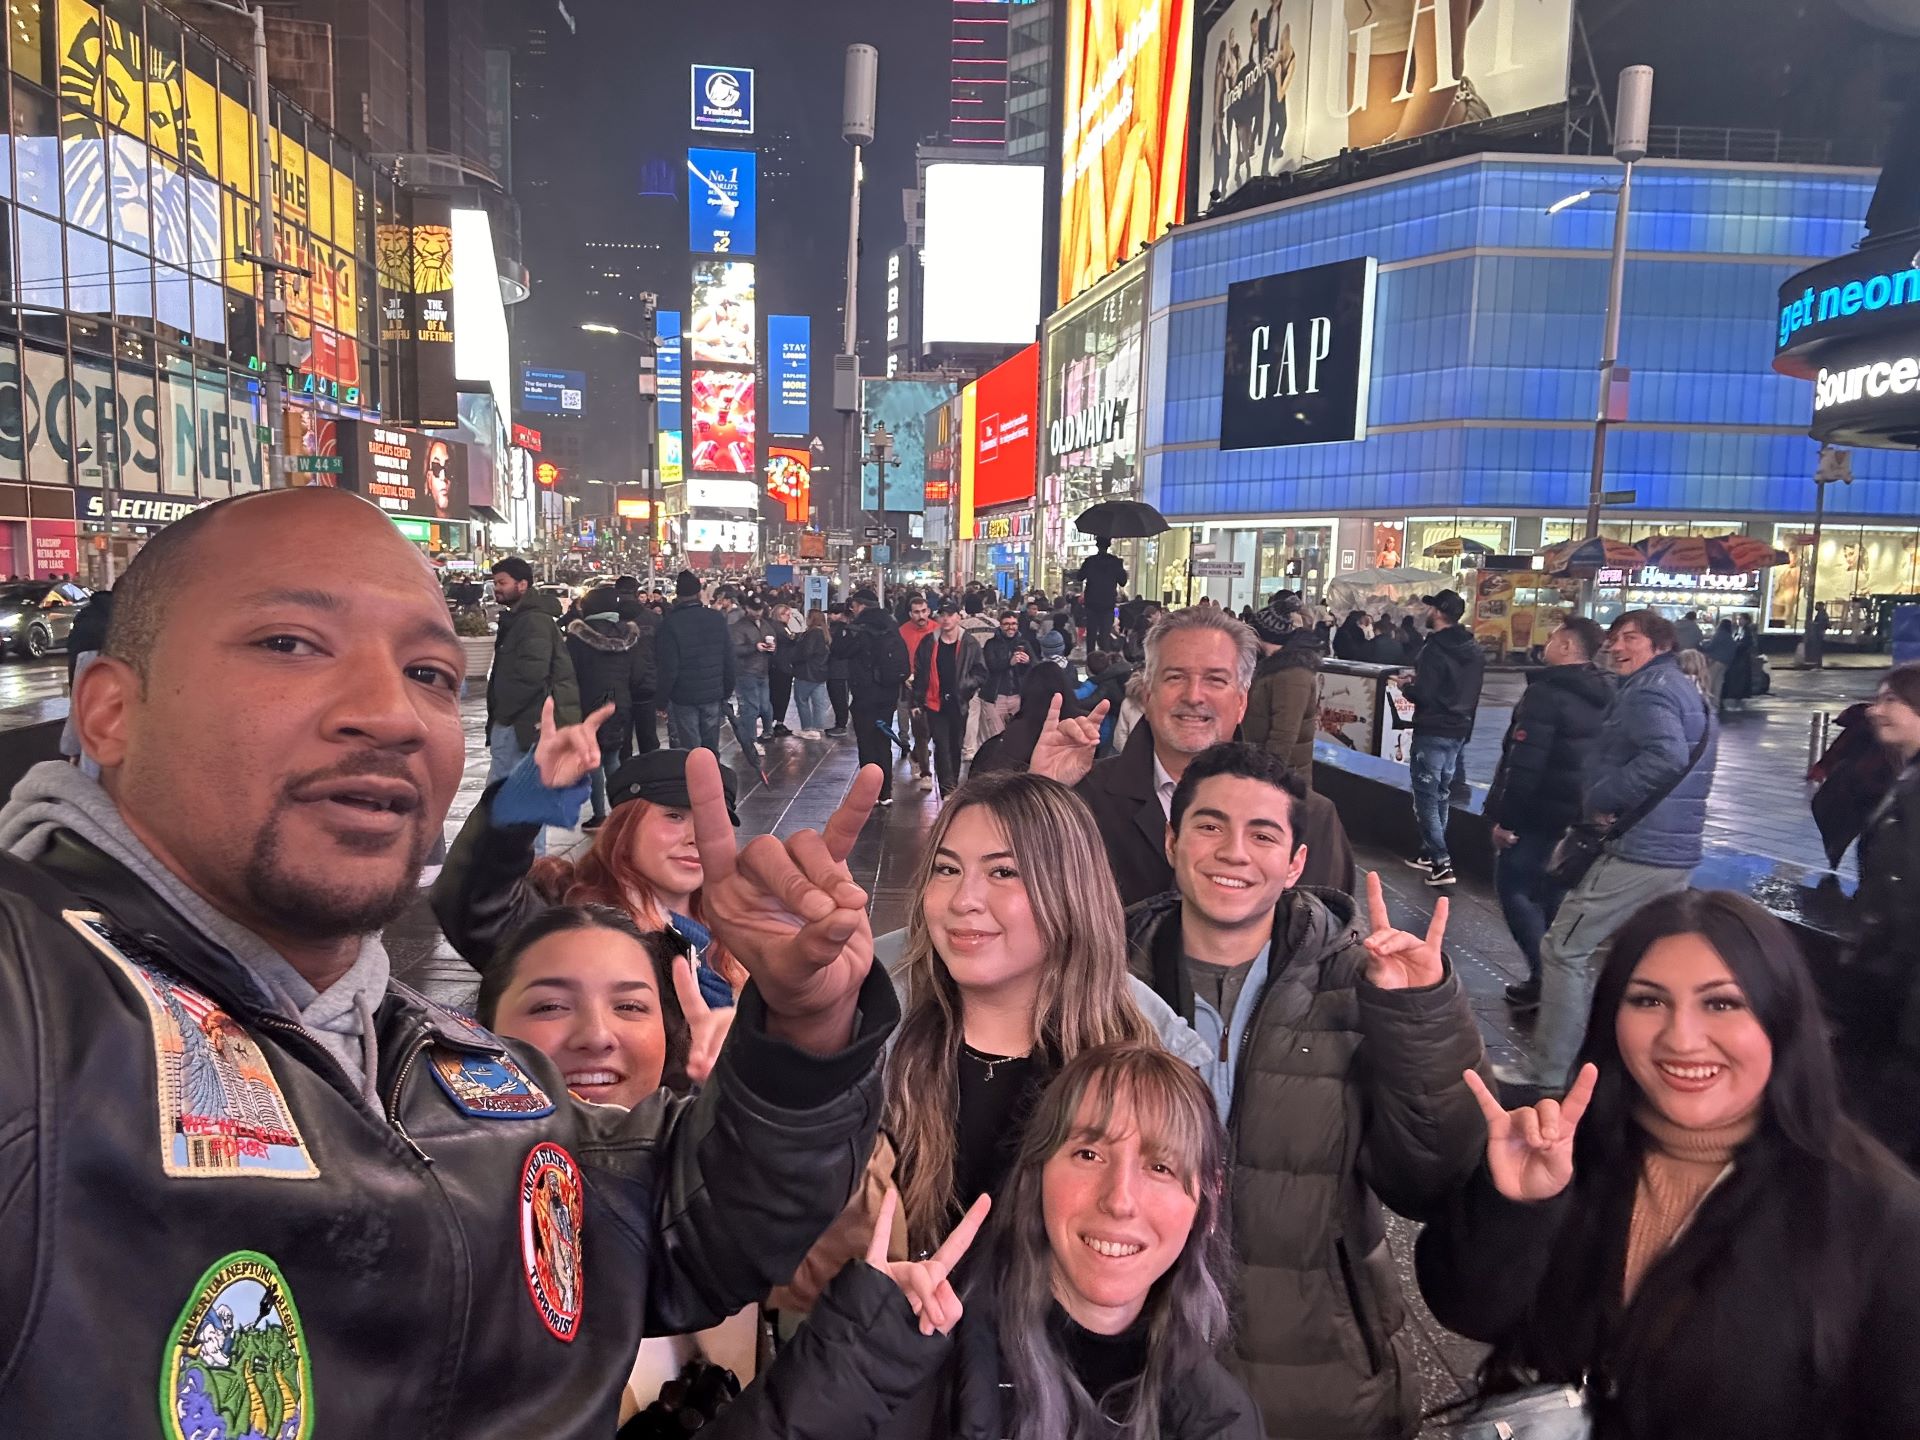 PDC hospitality management students and faculty enjoy the sights in New York City.